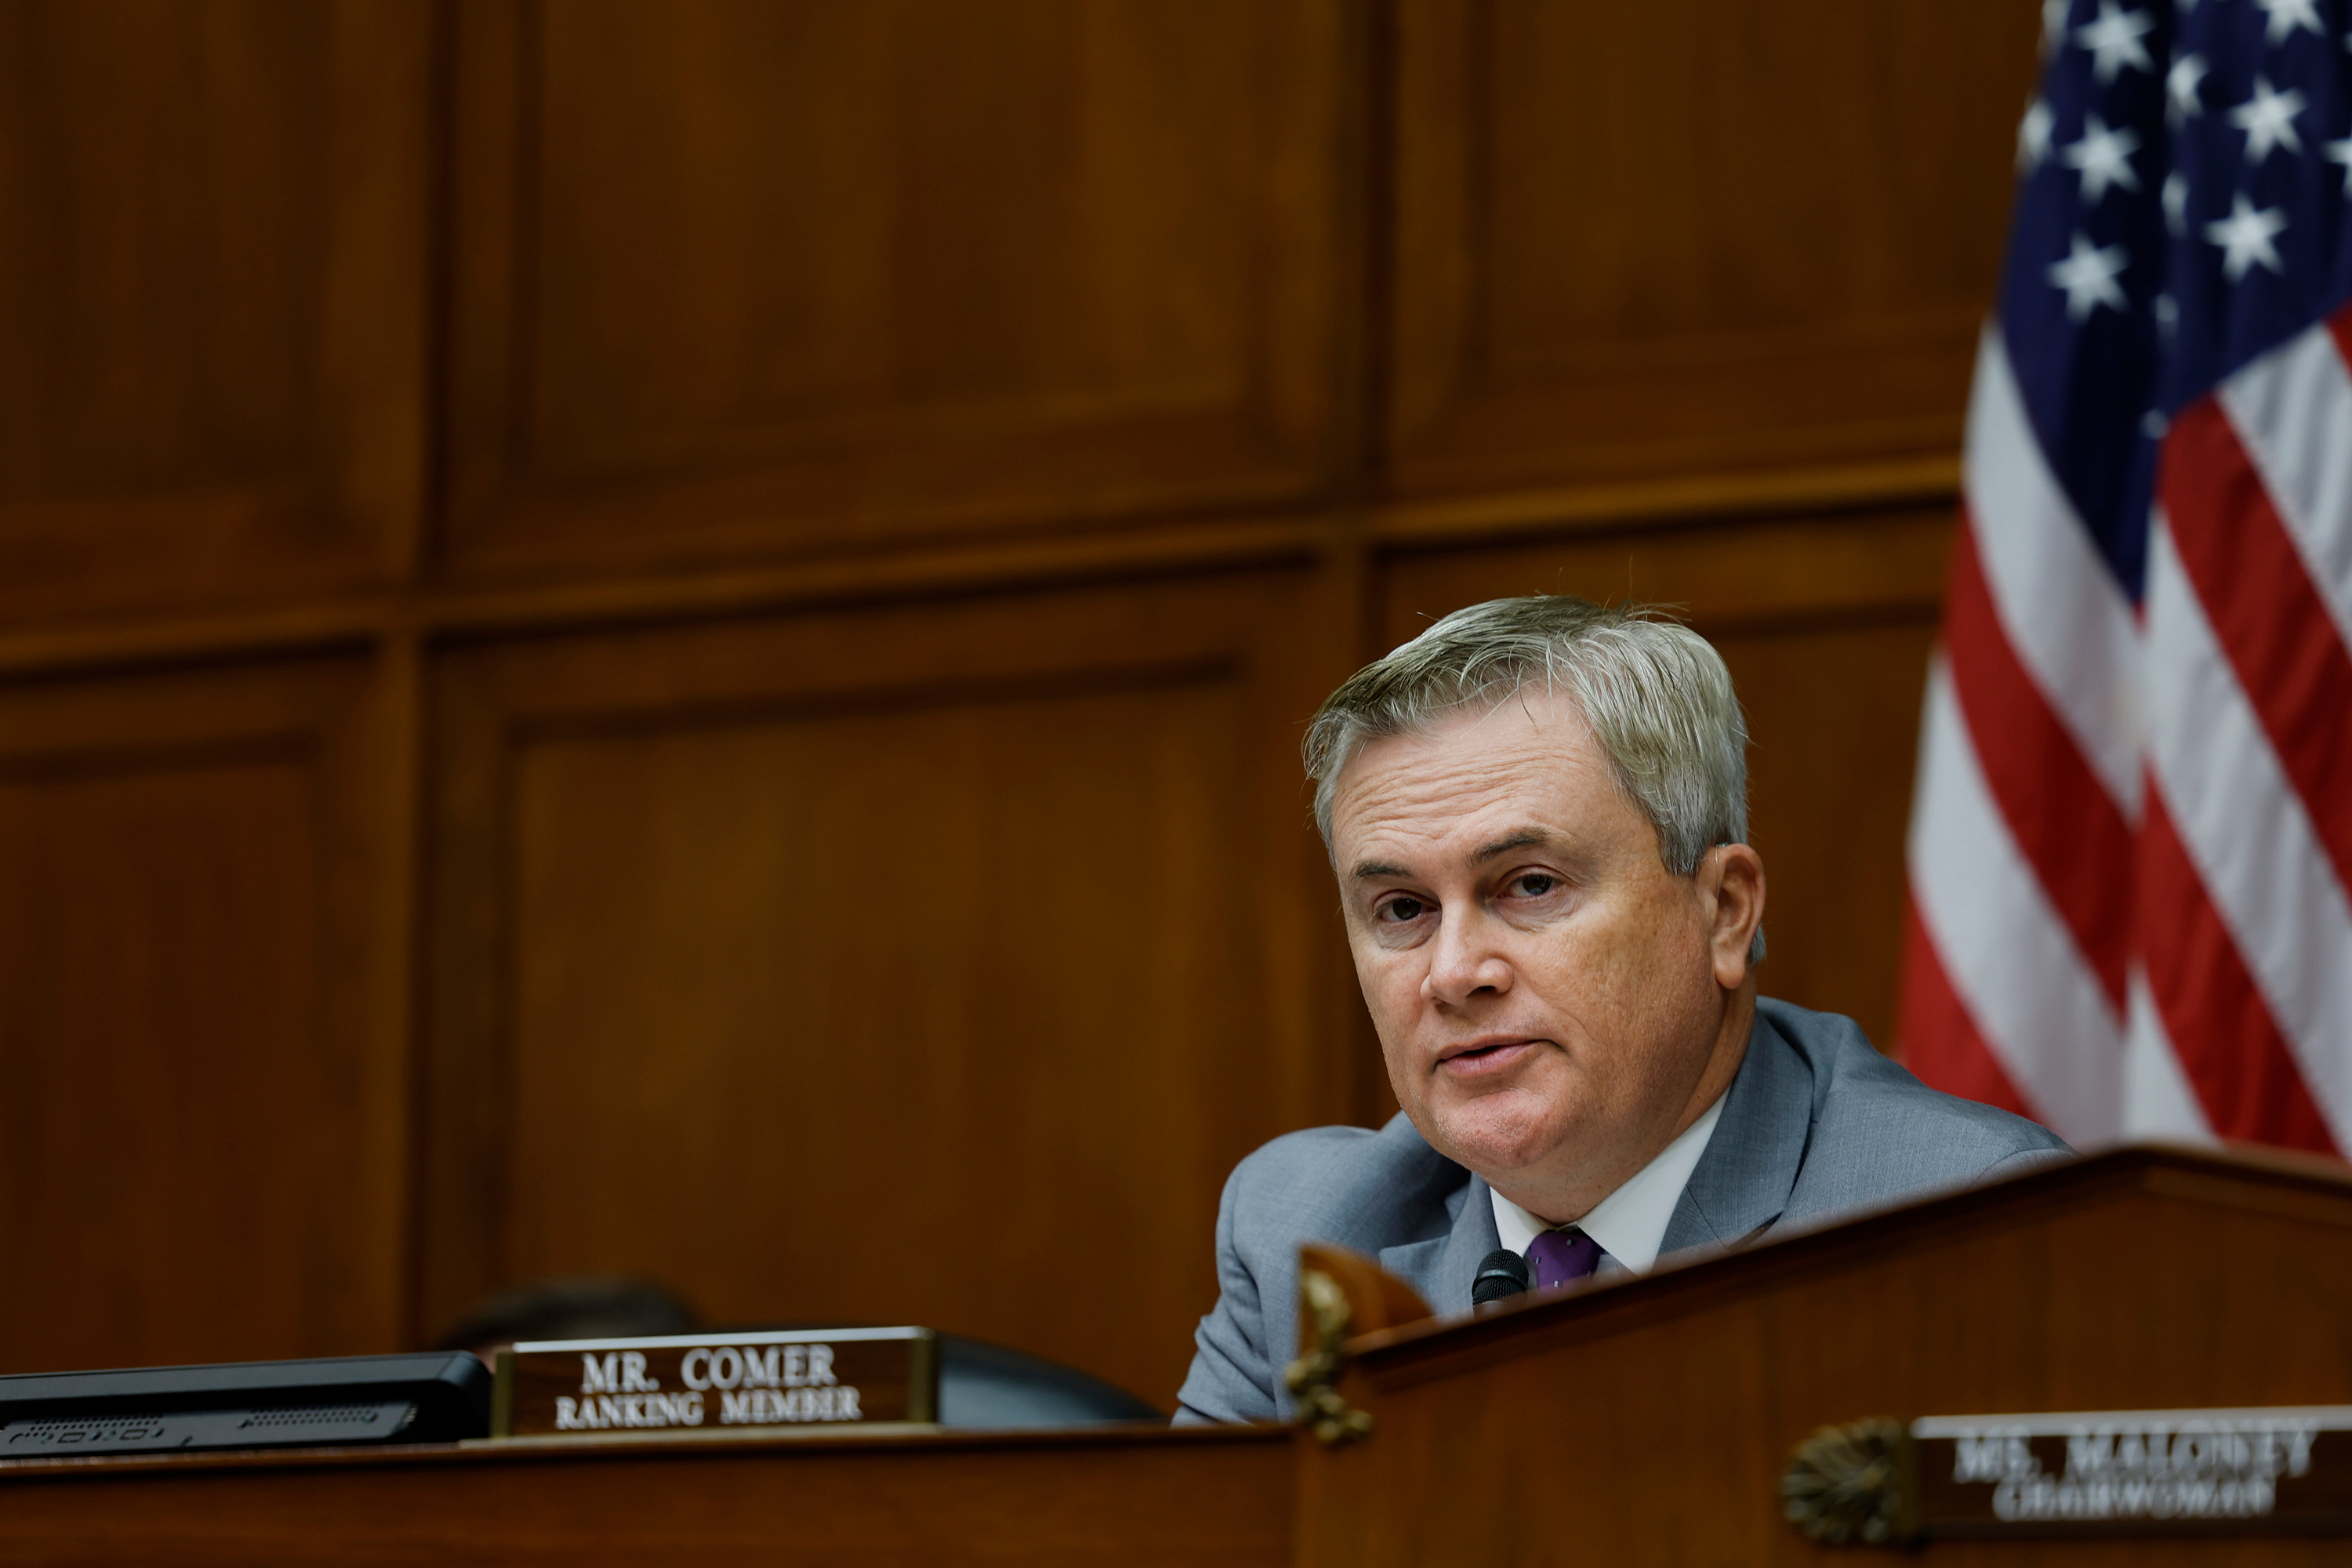 James Comer speaks during a House Oversight Committee hearing in Washington, DC on December 14, 2022.